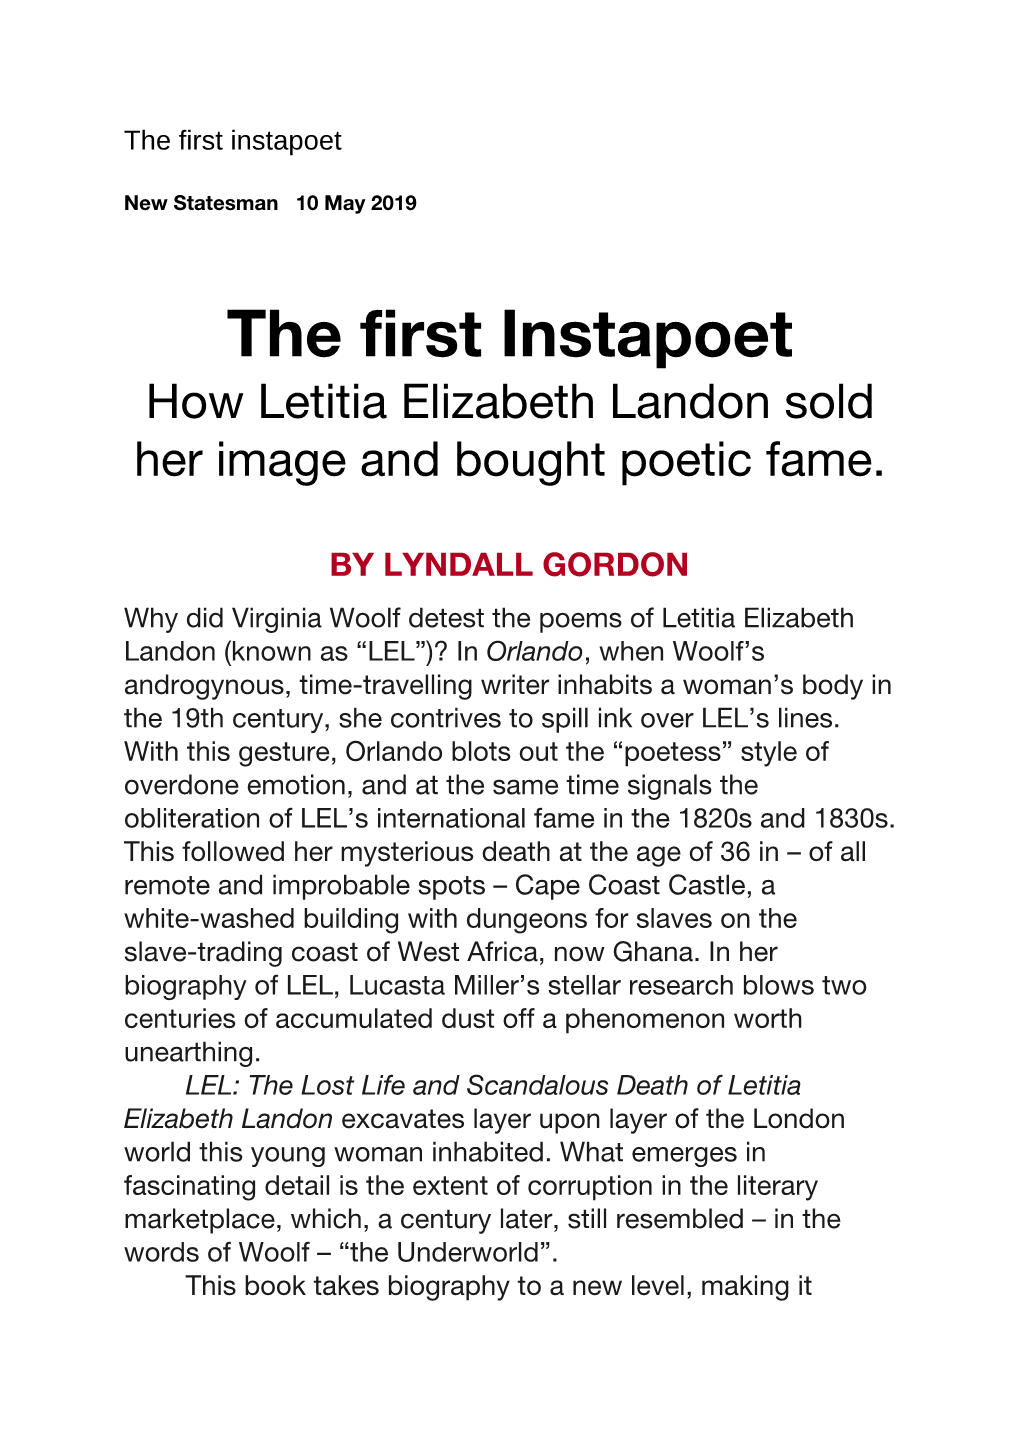 How Letitia Elizabeth Landon Sold Her Image and Bought Poetic Fame